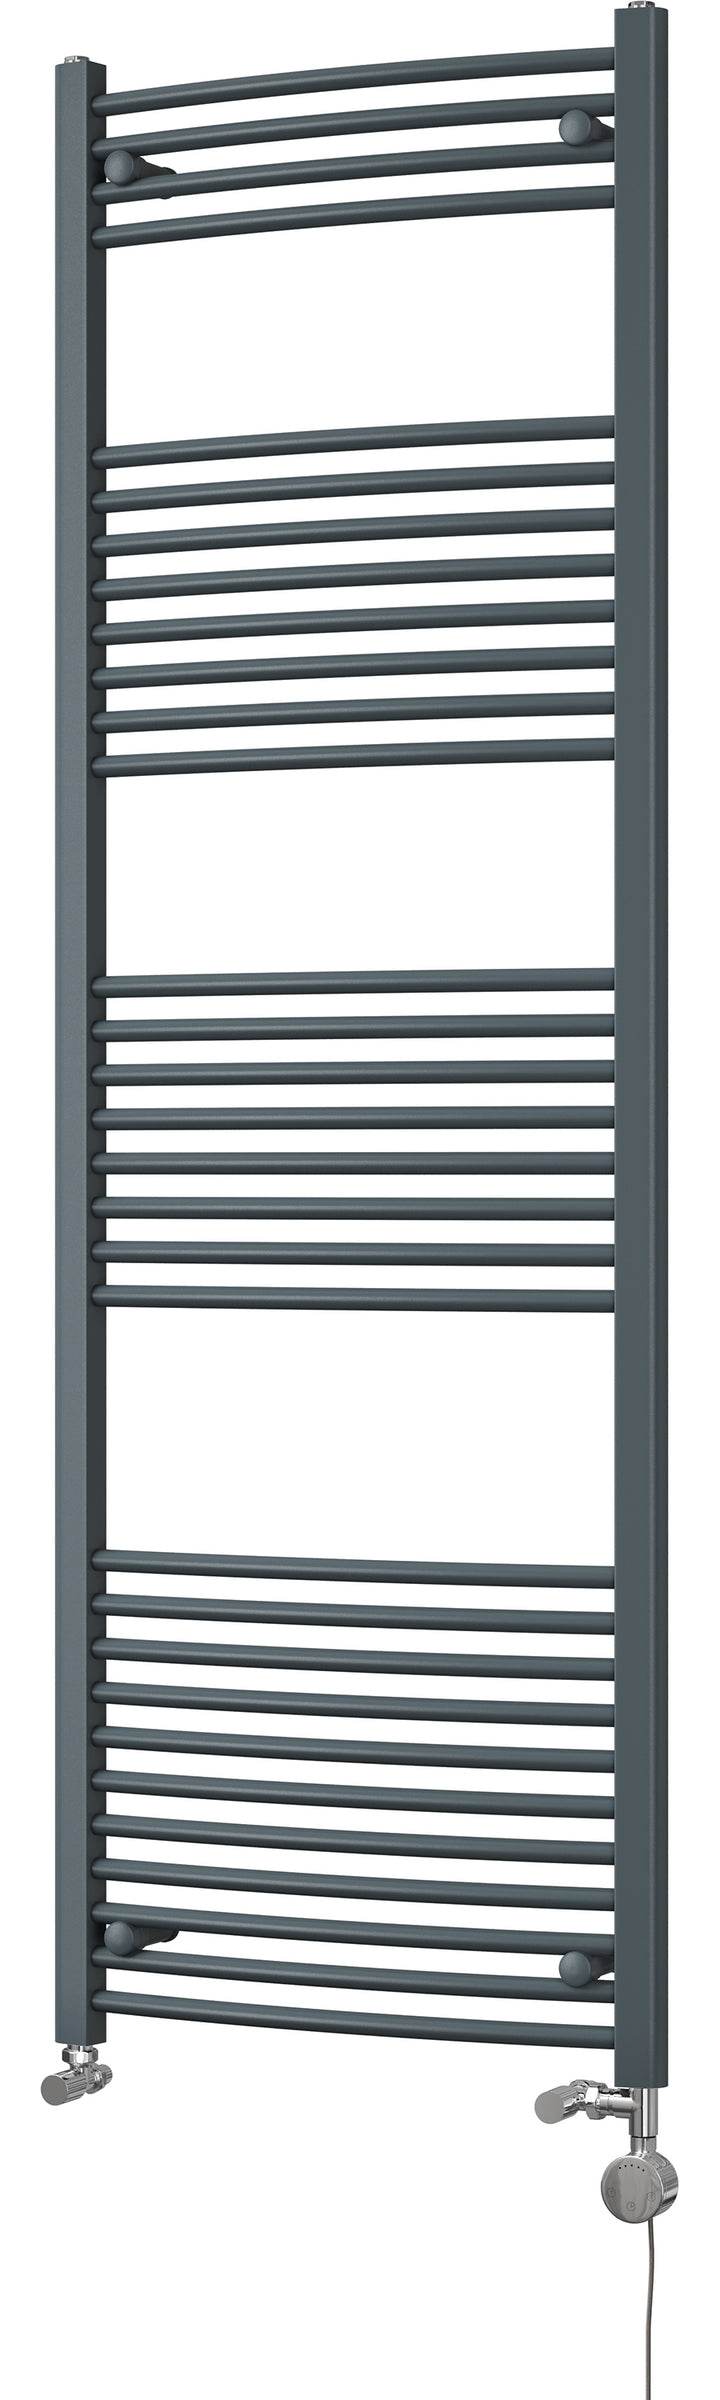 Zennor - Anthracite Dual Fuel Towel Rail  H1800mm x W600mm Thermostatic - Curved